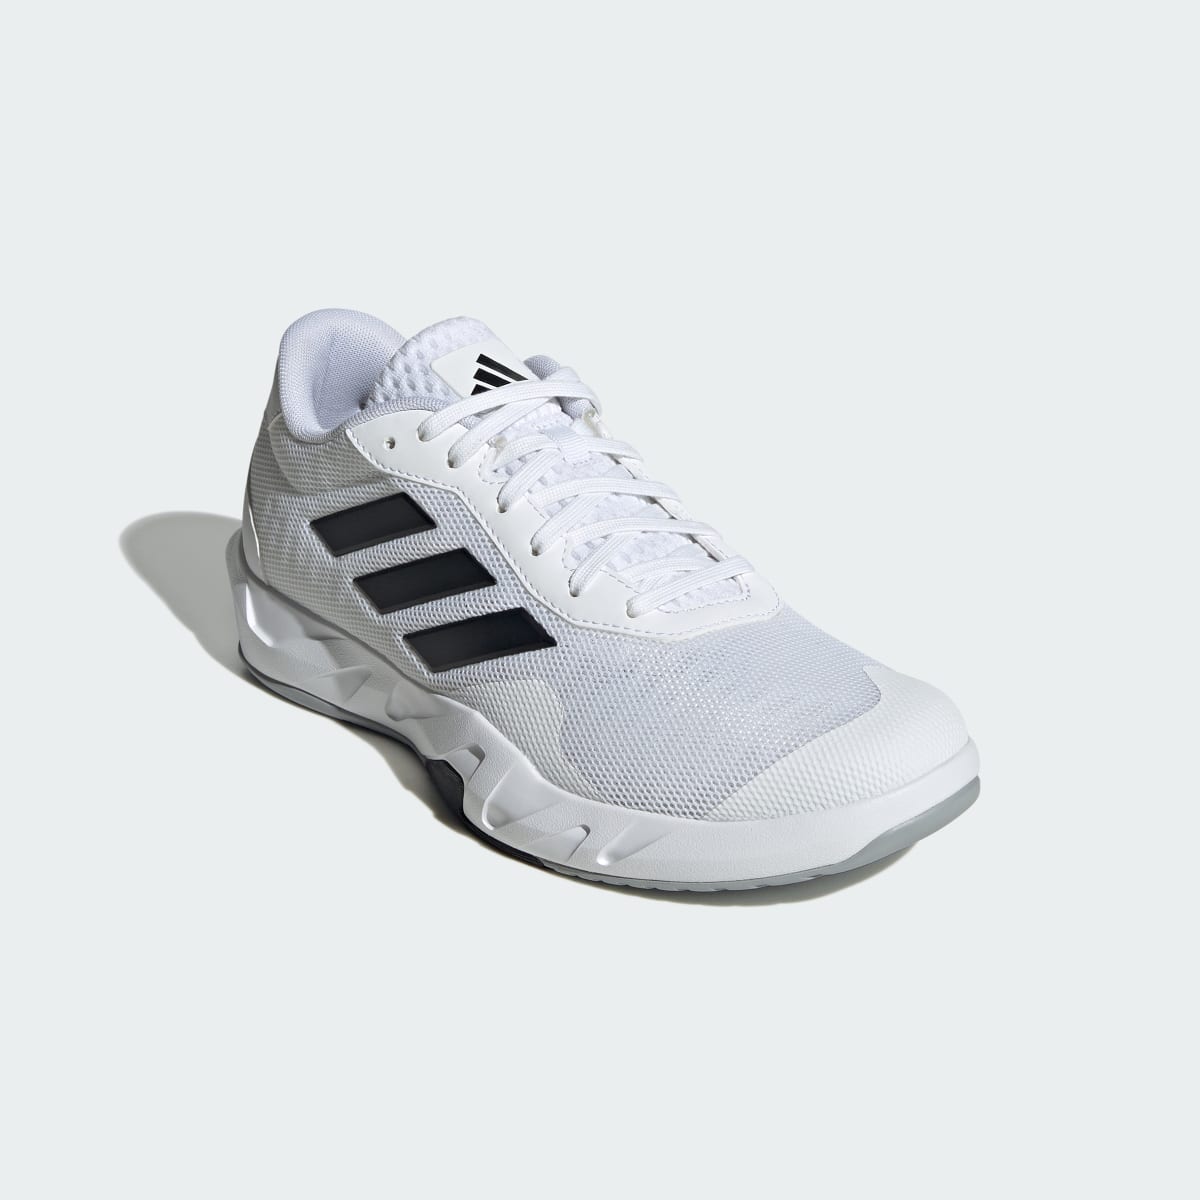 Adidas Amplimove Trainer Shoes. 5